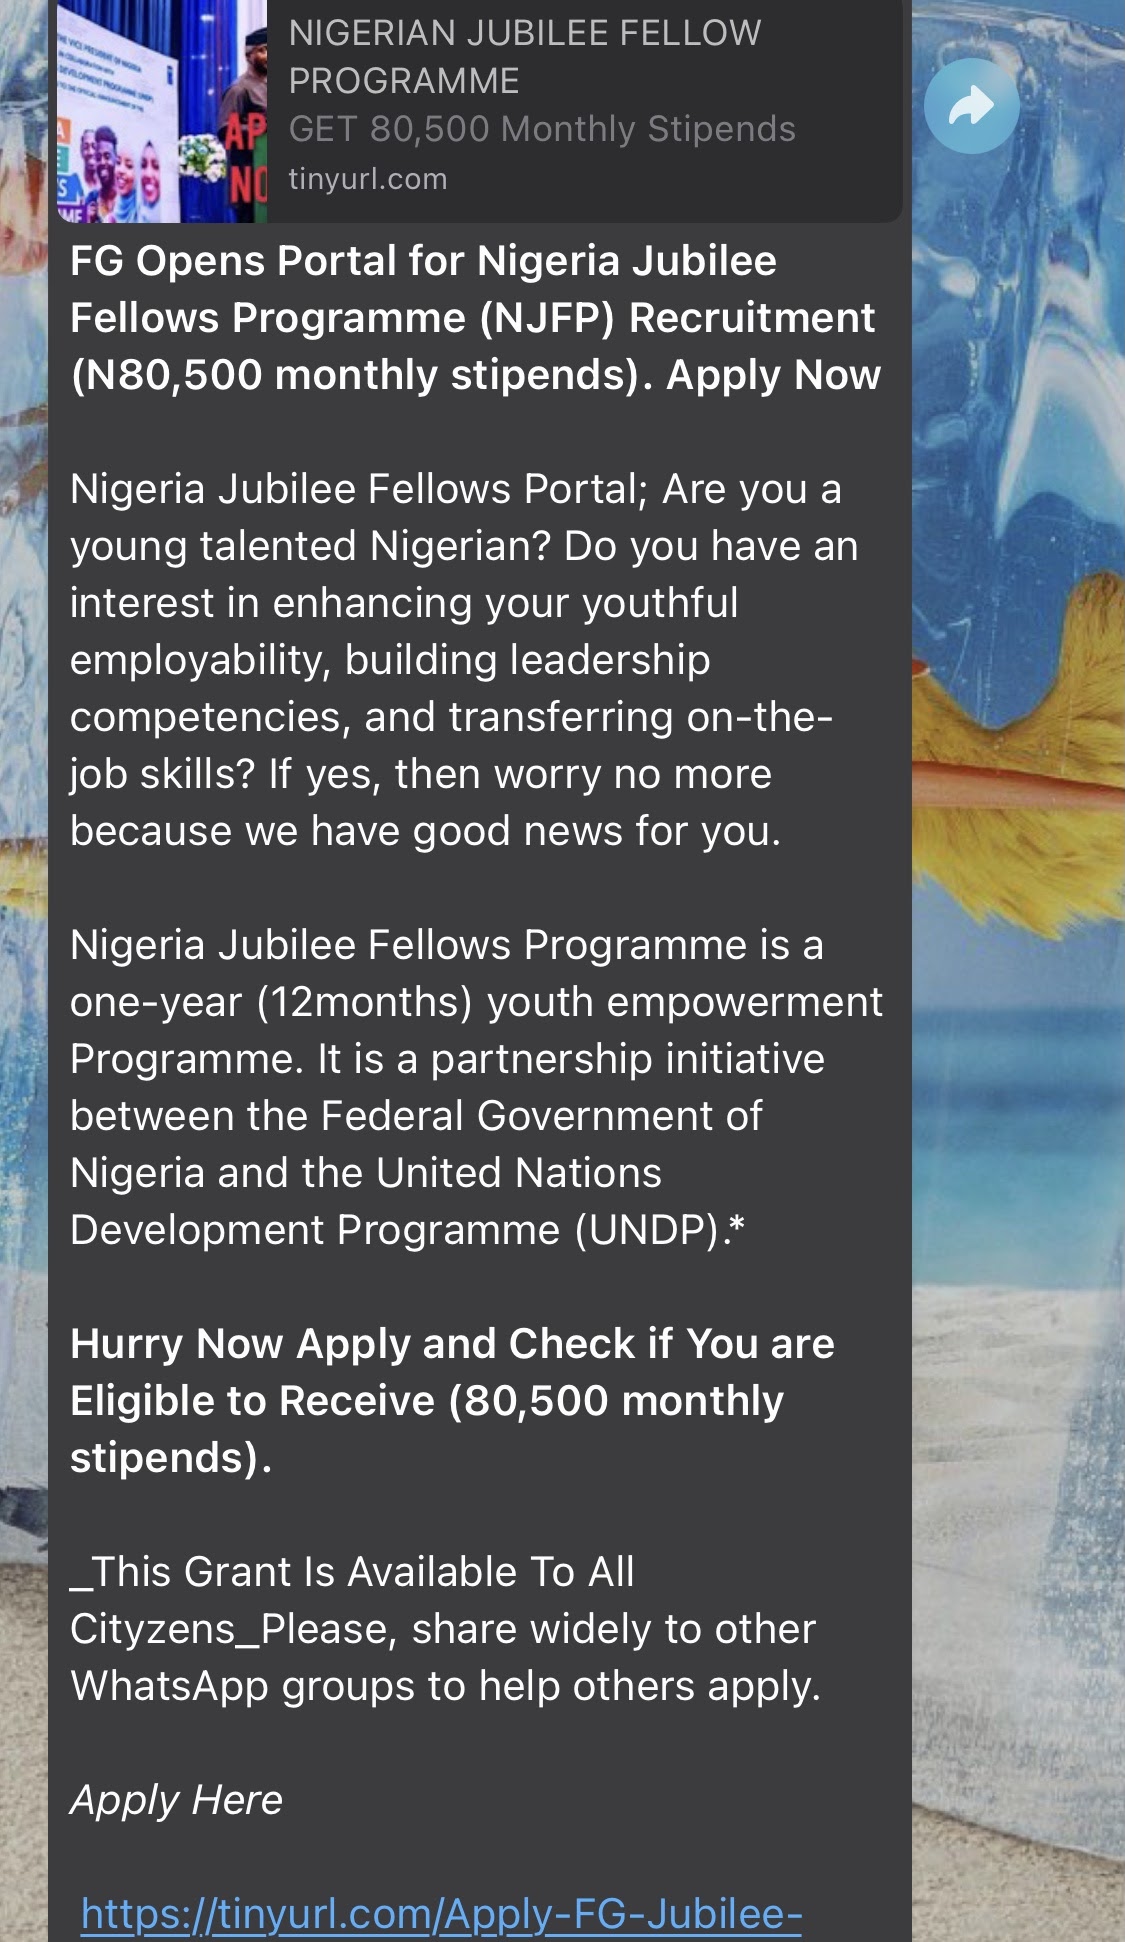 Message Asking Nigerians To Apply For FG’s Jubilee Fellows Programme Recruitment Is False